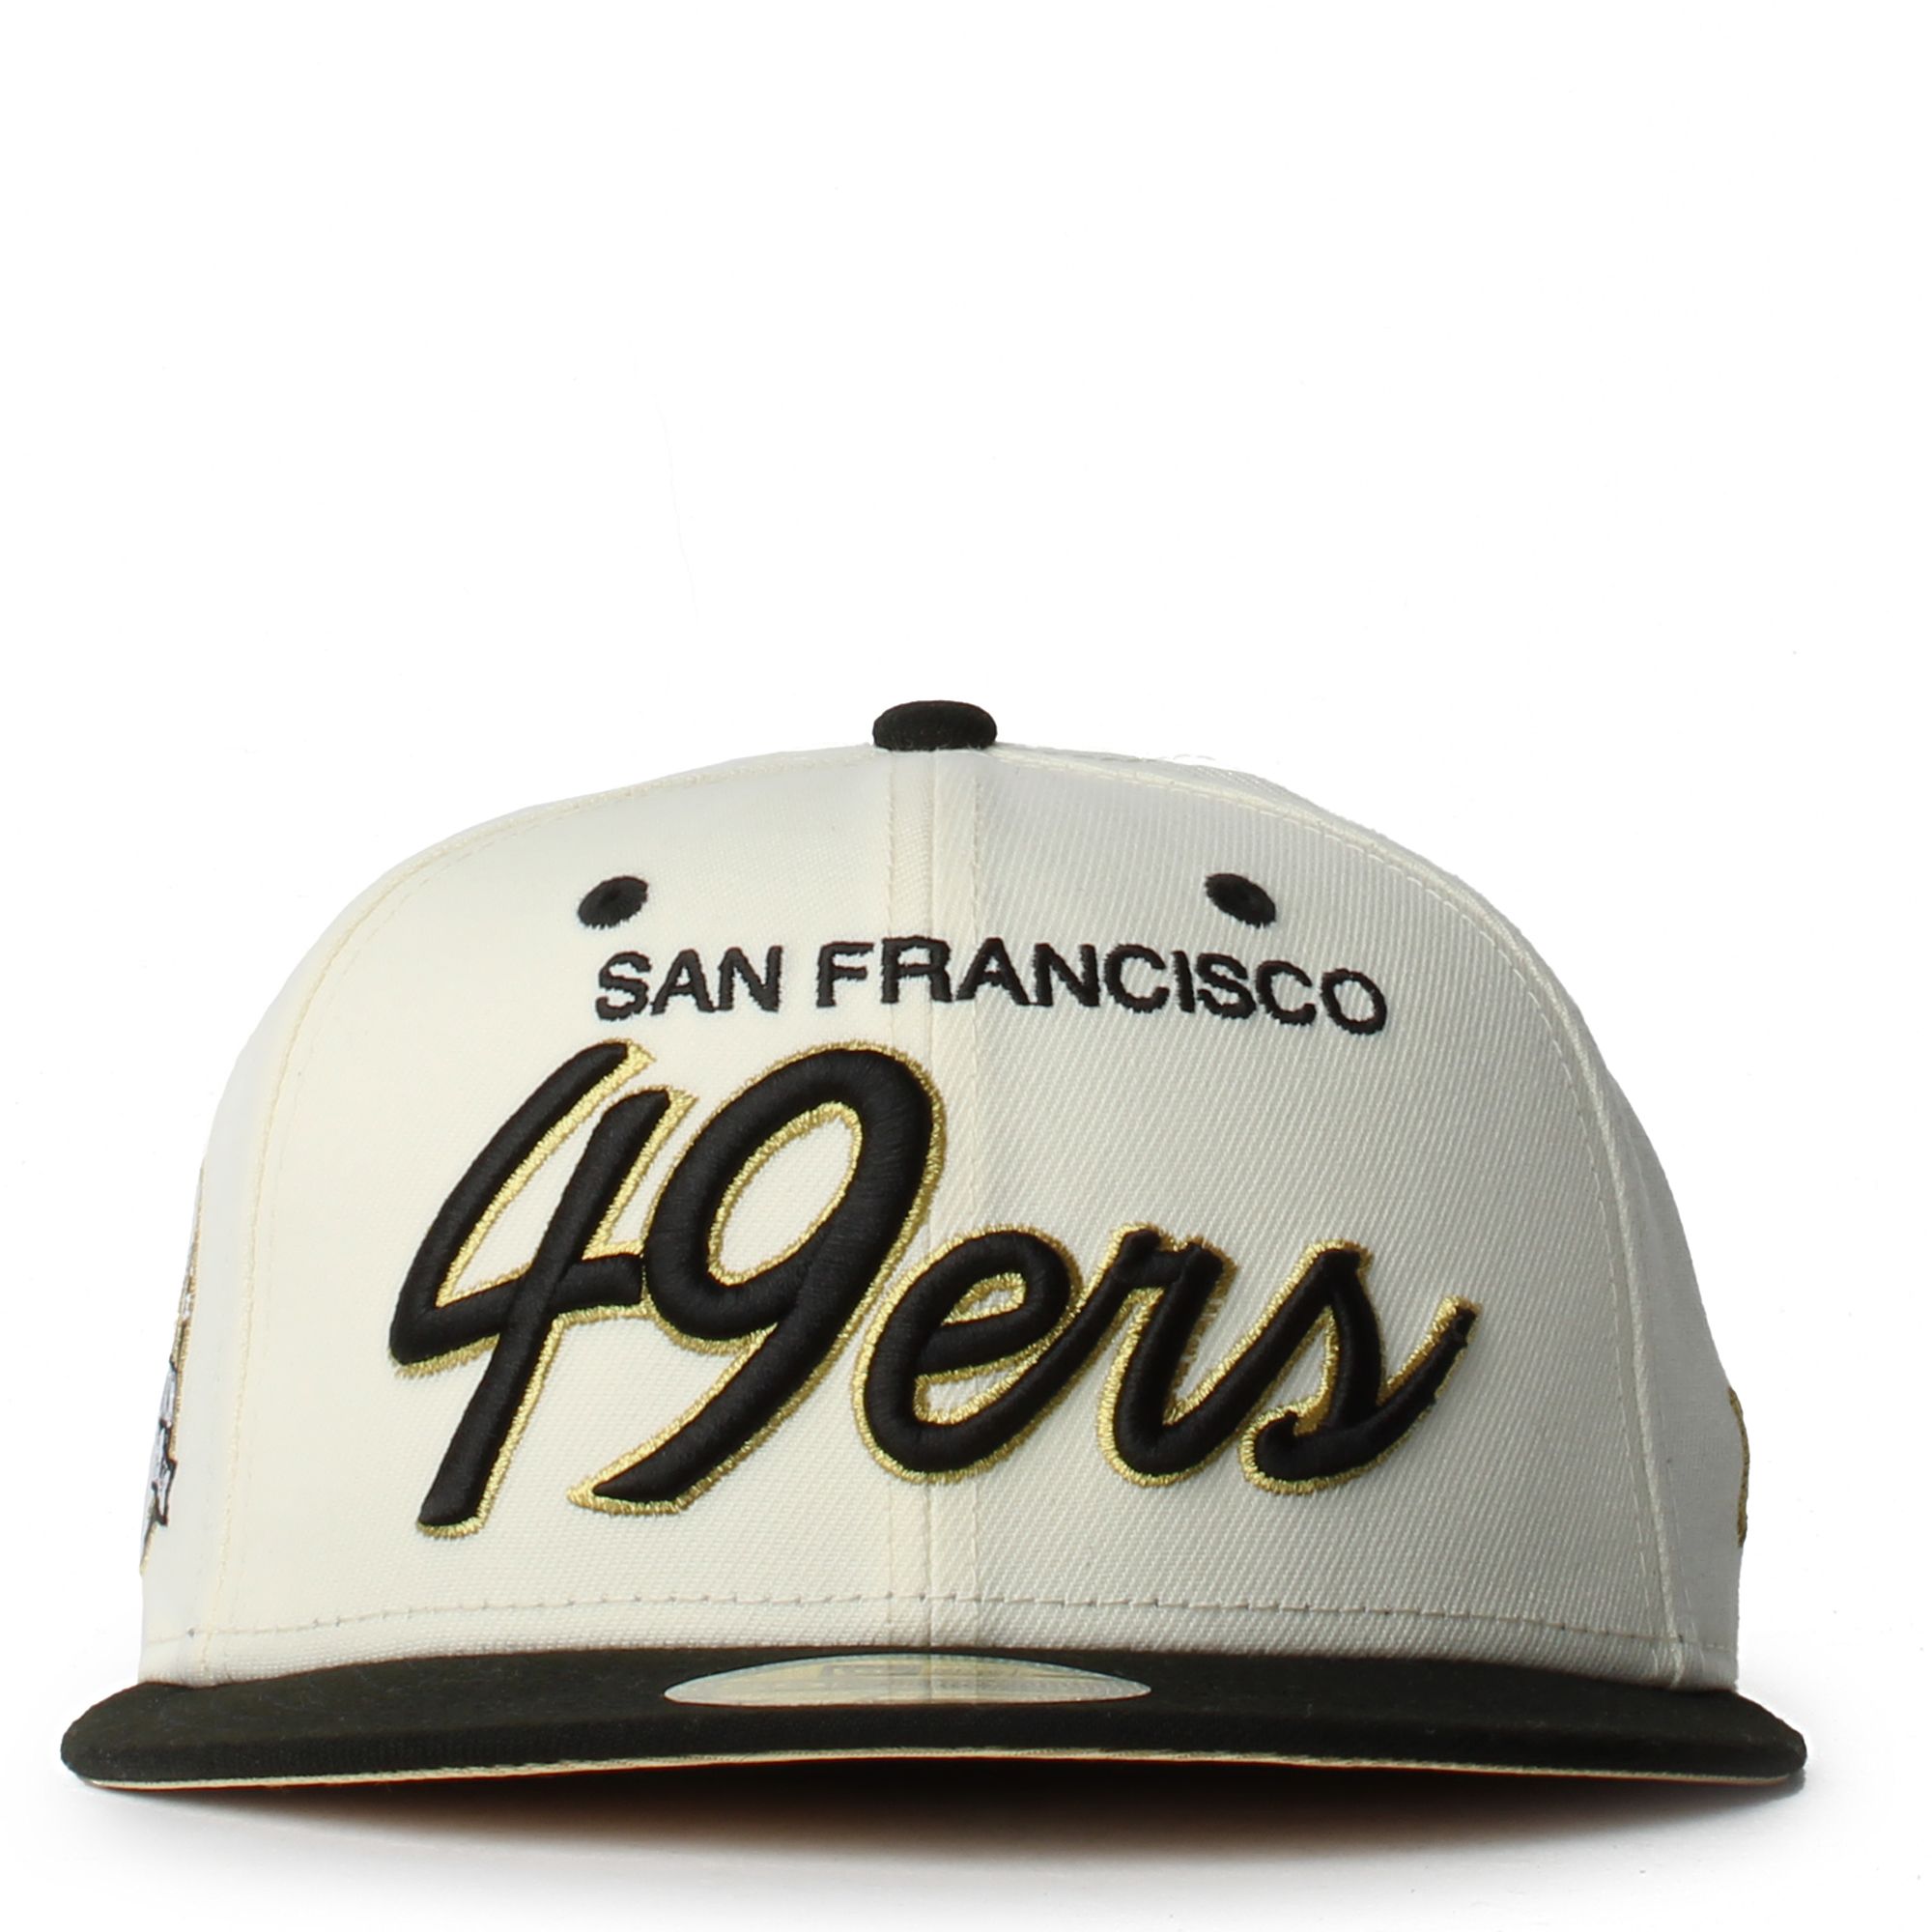 NEW ERA CAPS San Francisco 49ers Chrome Fitted Hat 70810511 - Shiekh